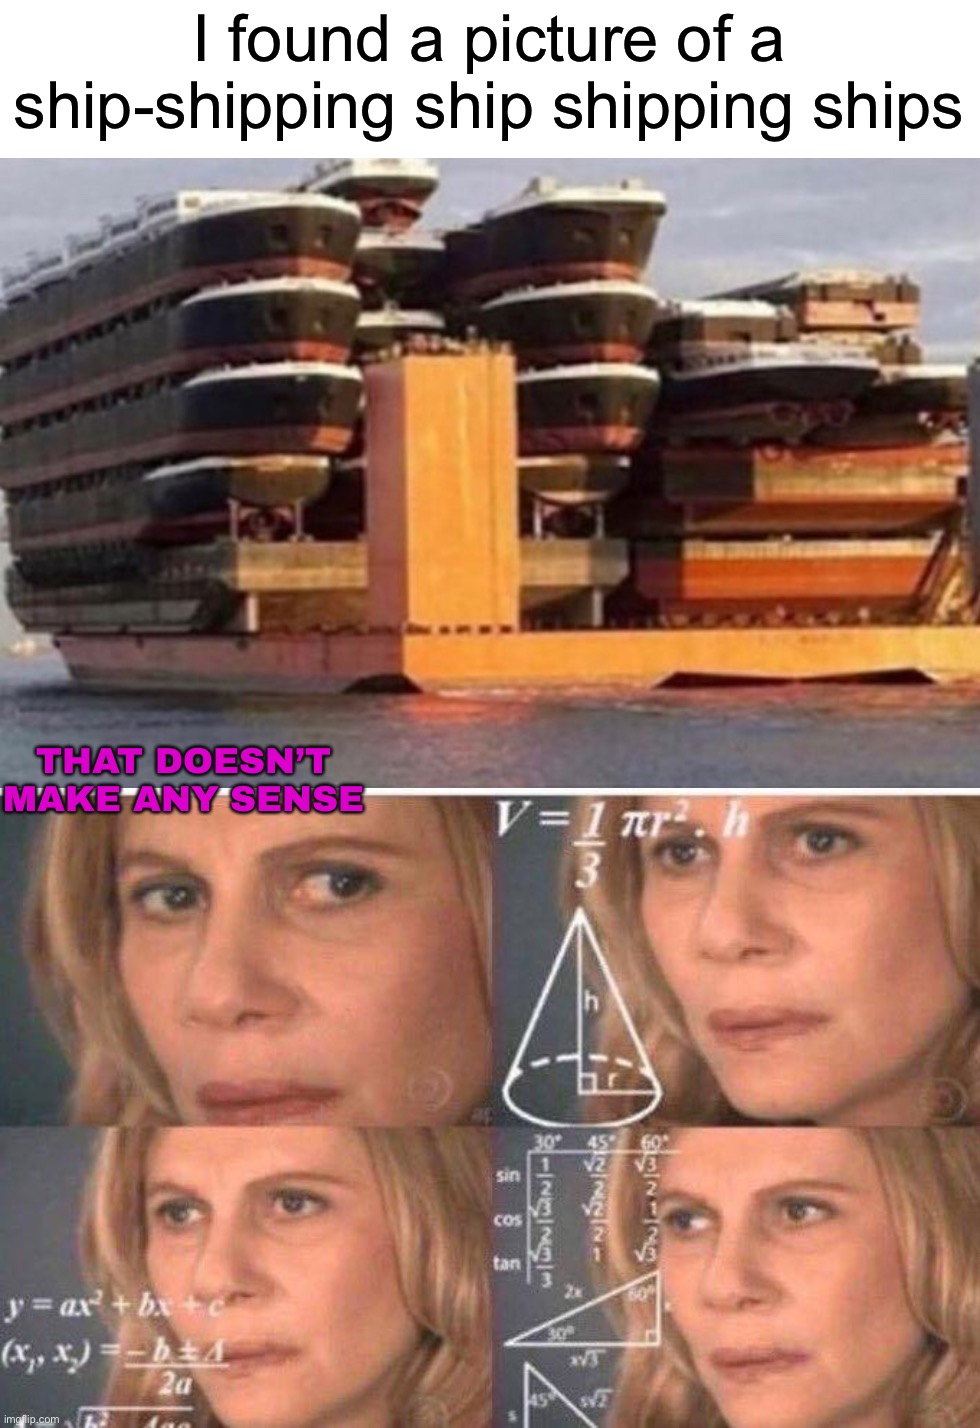 A ship shipping a ship while ship- ship sh- I- idk | I found a picture of a ship-shipping ship shipping ships; THAT DOESN’T MAKE ANY SENSE | image tagged in math lady/confused lady,memes,funny,ship,shipping,hmmm | made w/ Imgflip meme maker